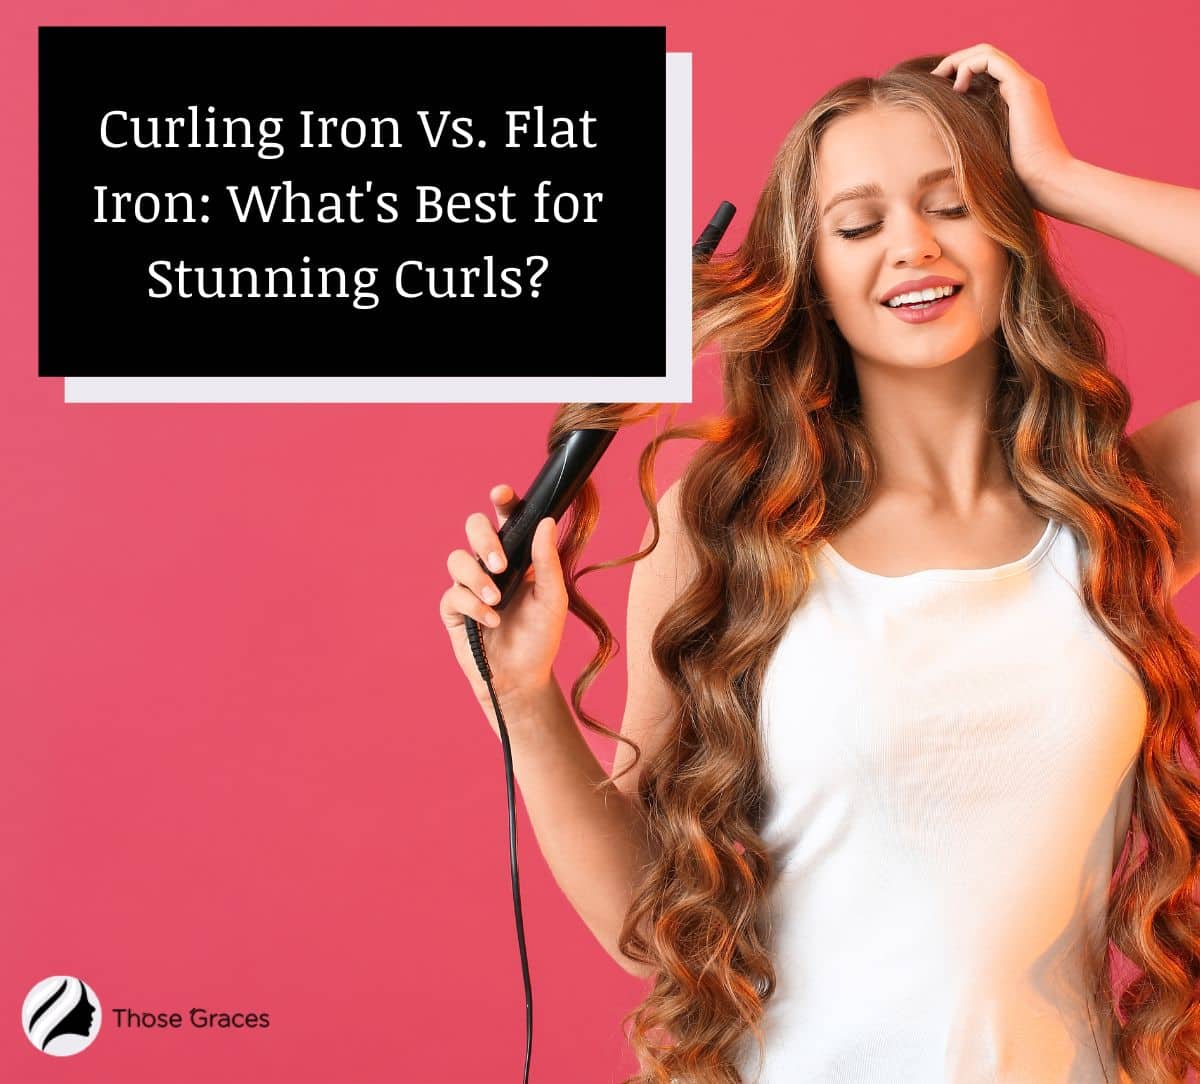 Lady curling her hair using a curling iron posing beside "curling iron vs flat iron"